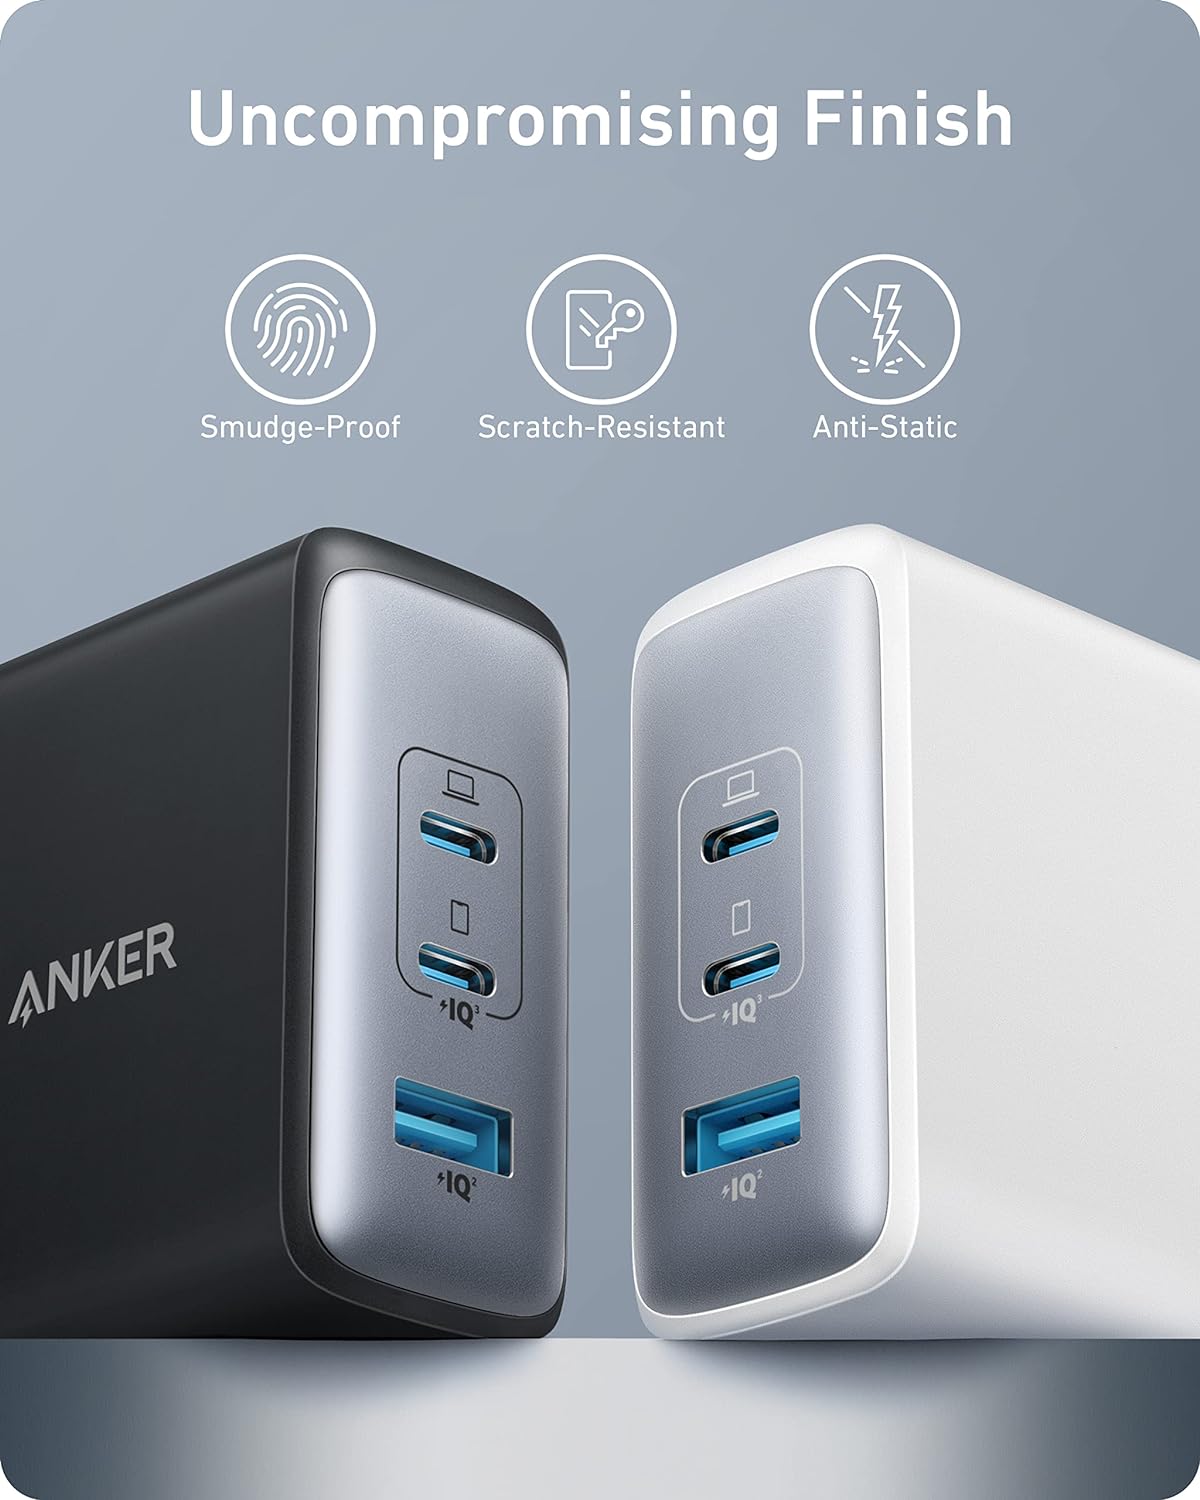 Anker 736 Nano II 100W USB C Charger - Compact, 3-Port GaN Fast Charger for MacBook Pro\/Air, Google Pixelbook, ThinkPad, Dell XPS, iPad Pro, iPhone 14\/Pro, Galaxy S22\/S20 - Ideal for Travel